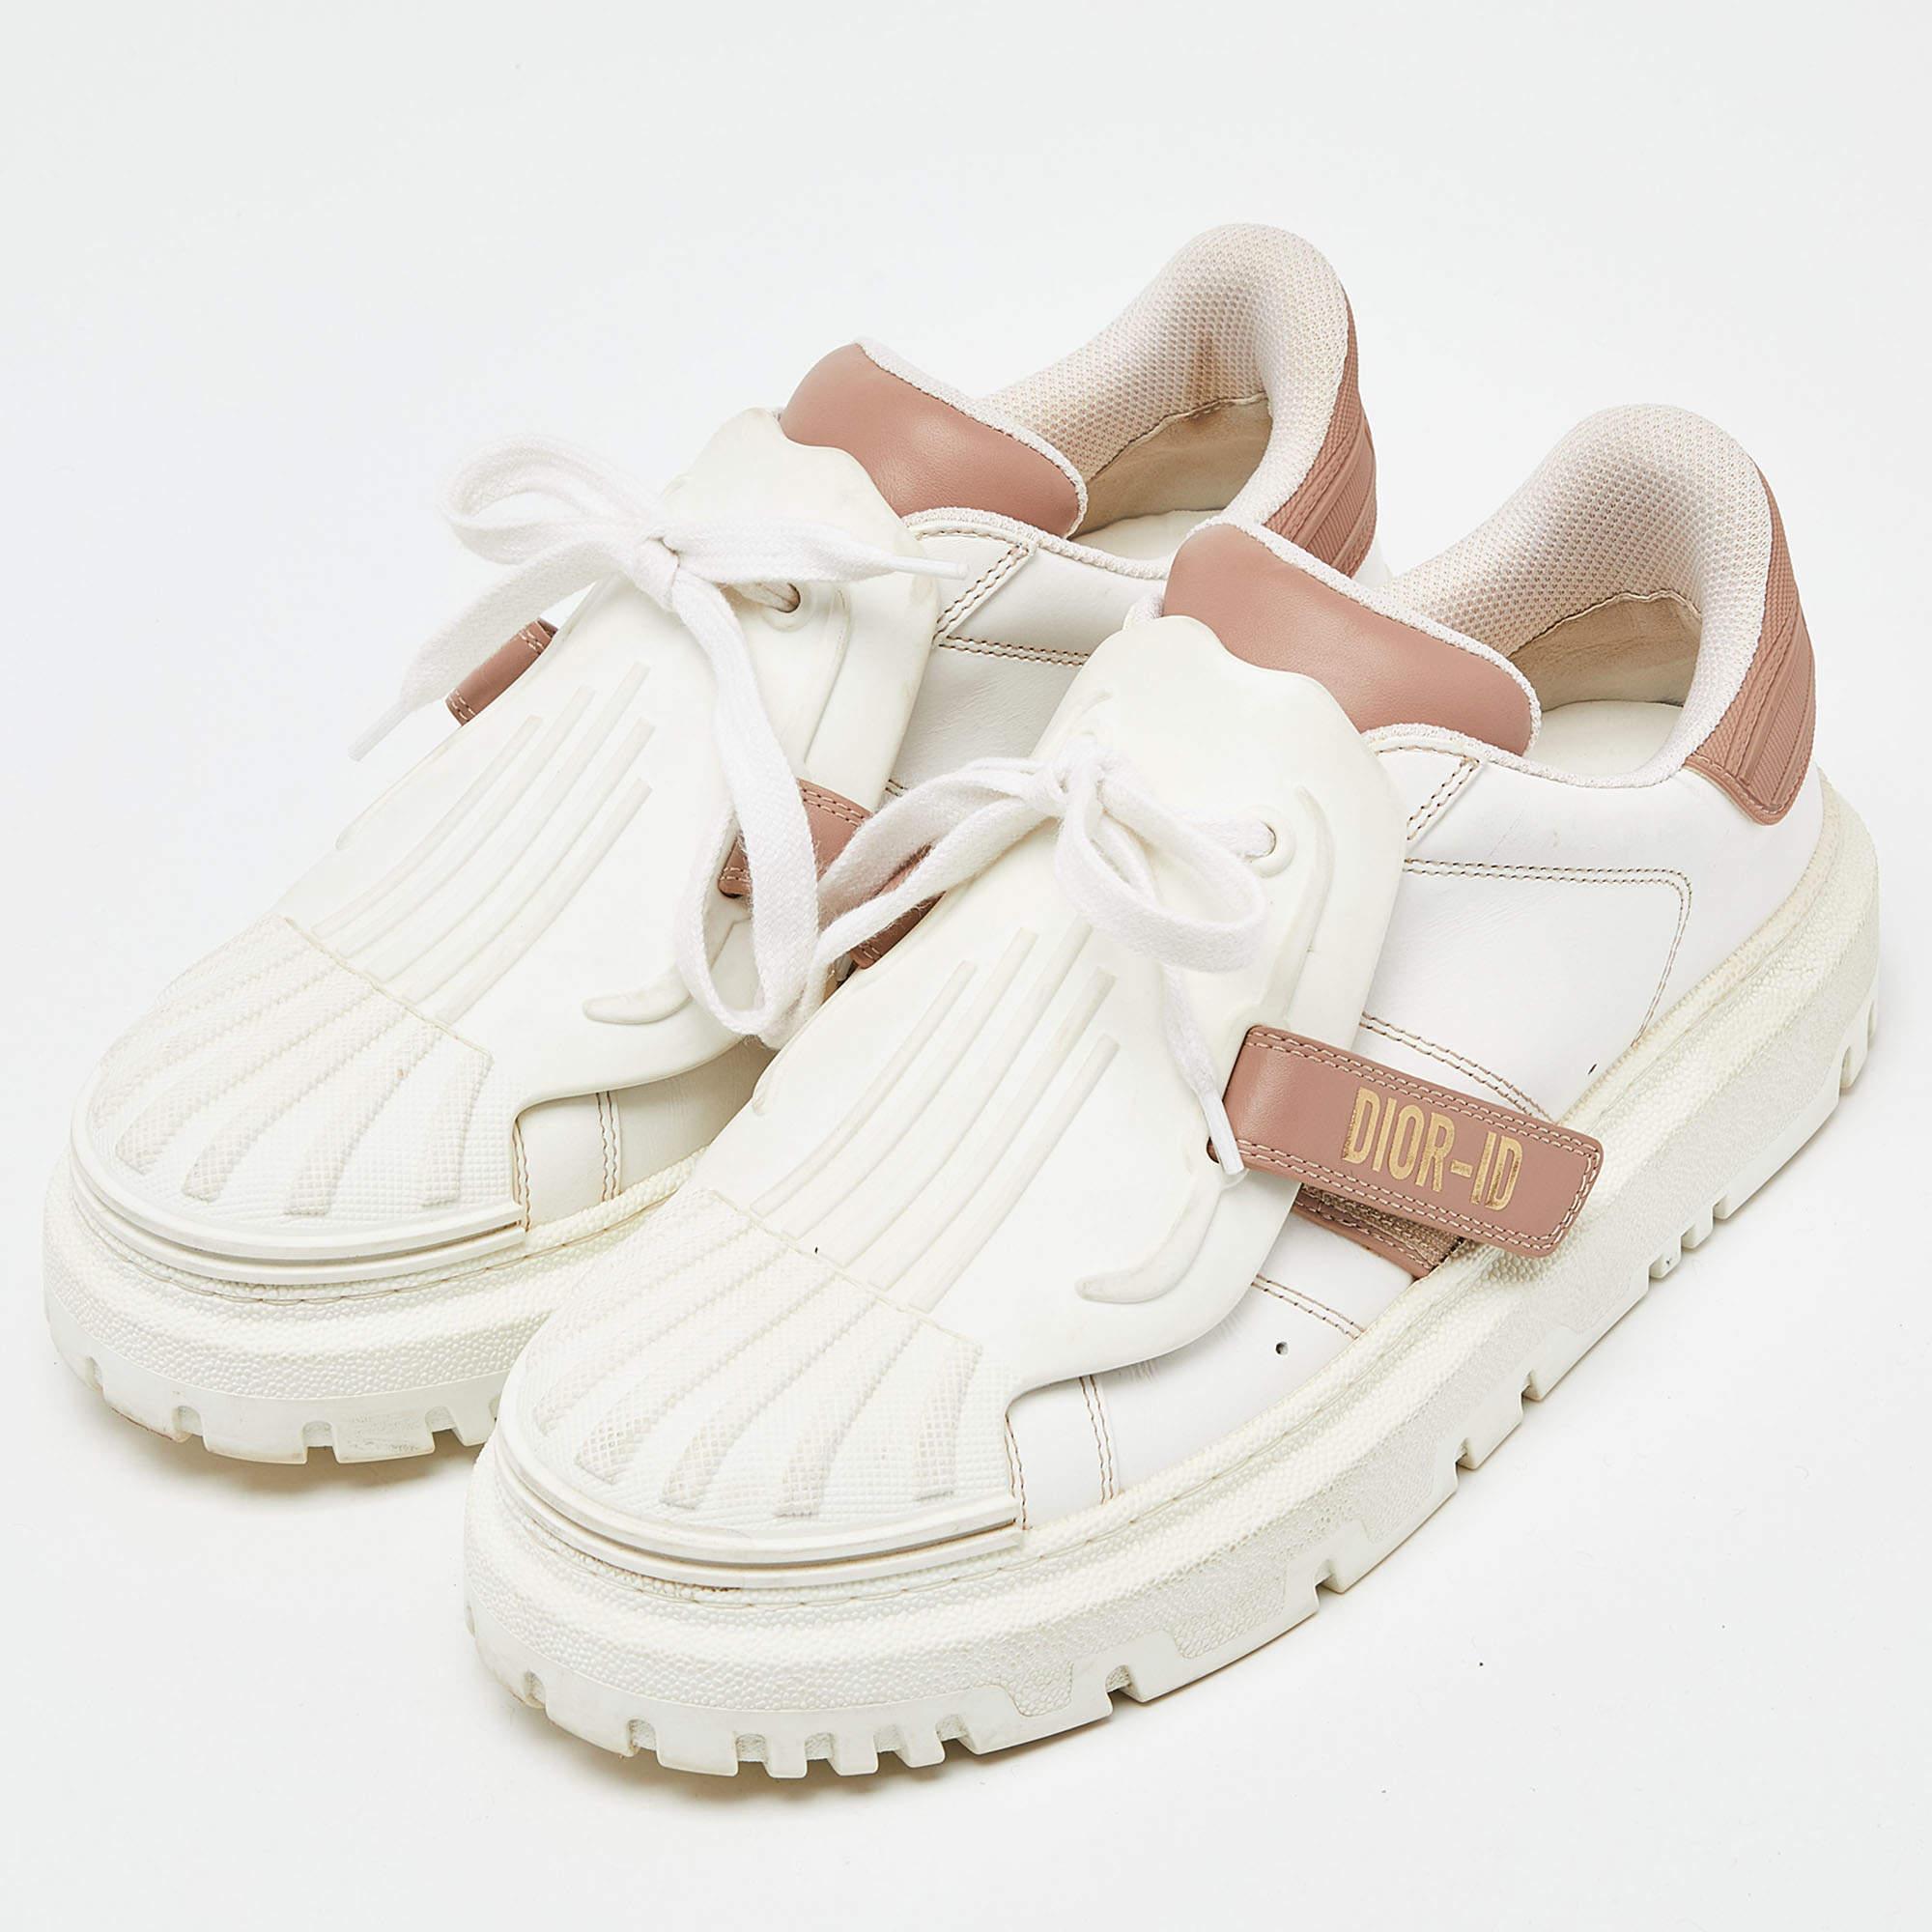 Coming in a classic silhouette, these Dior Dior ID sneakers are a seamless combination of luxury, comfort, and style. These sneakers are finished with signature details and comfortable insoles.

